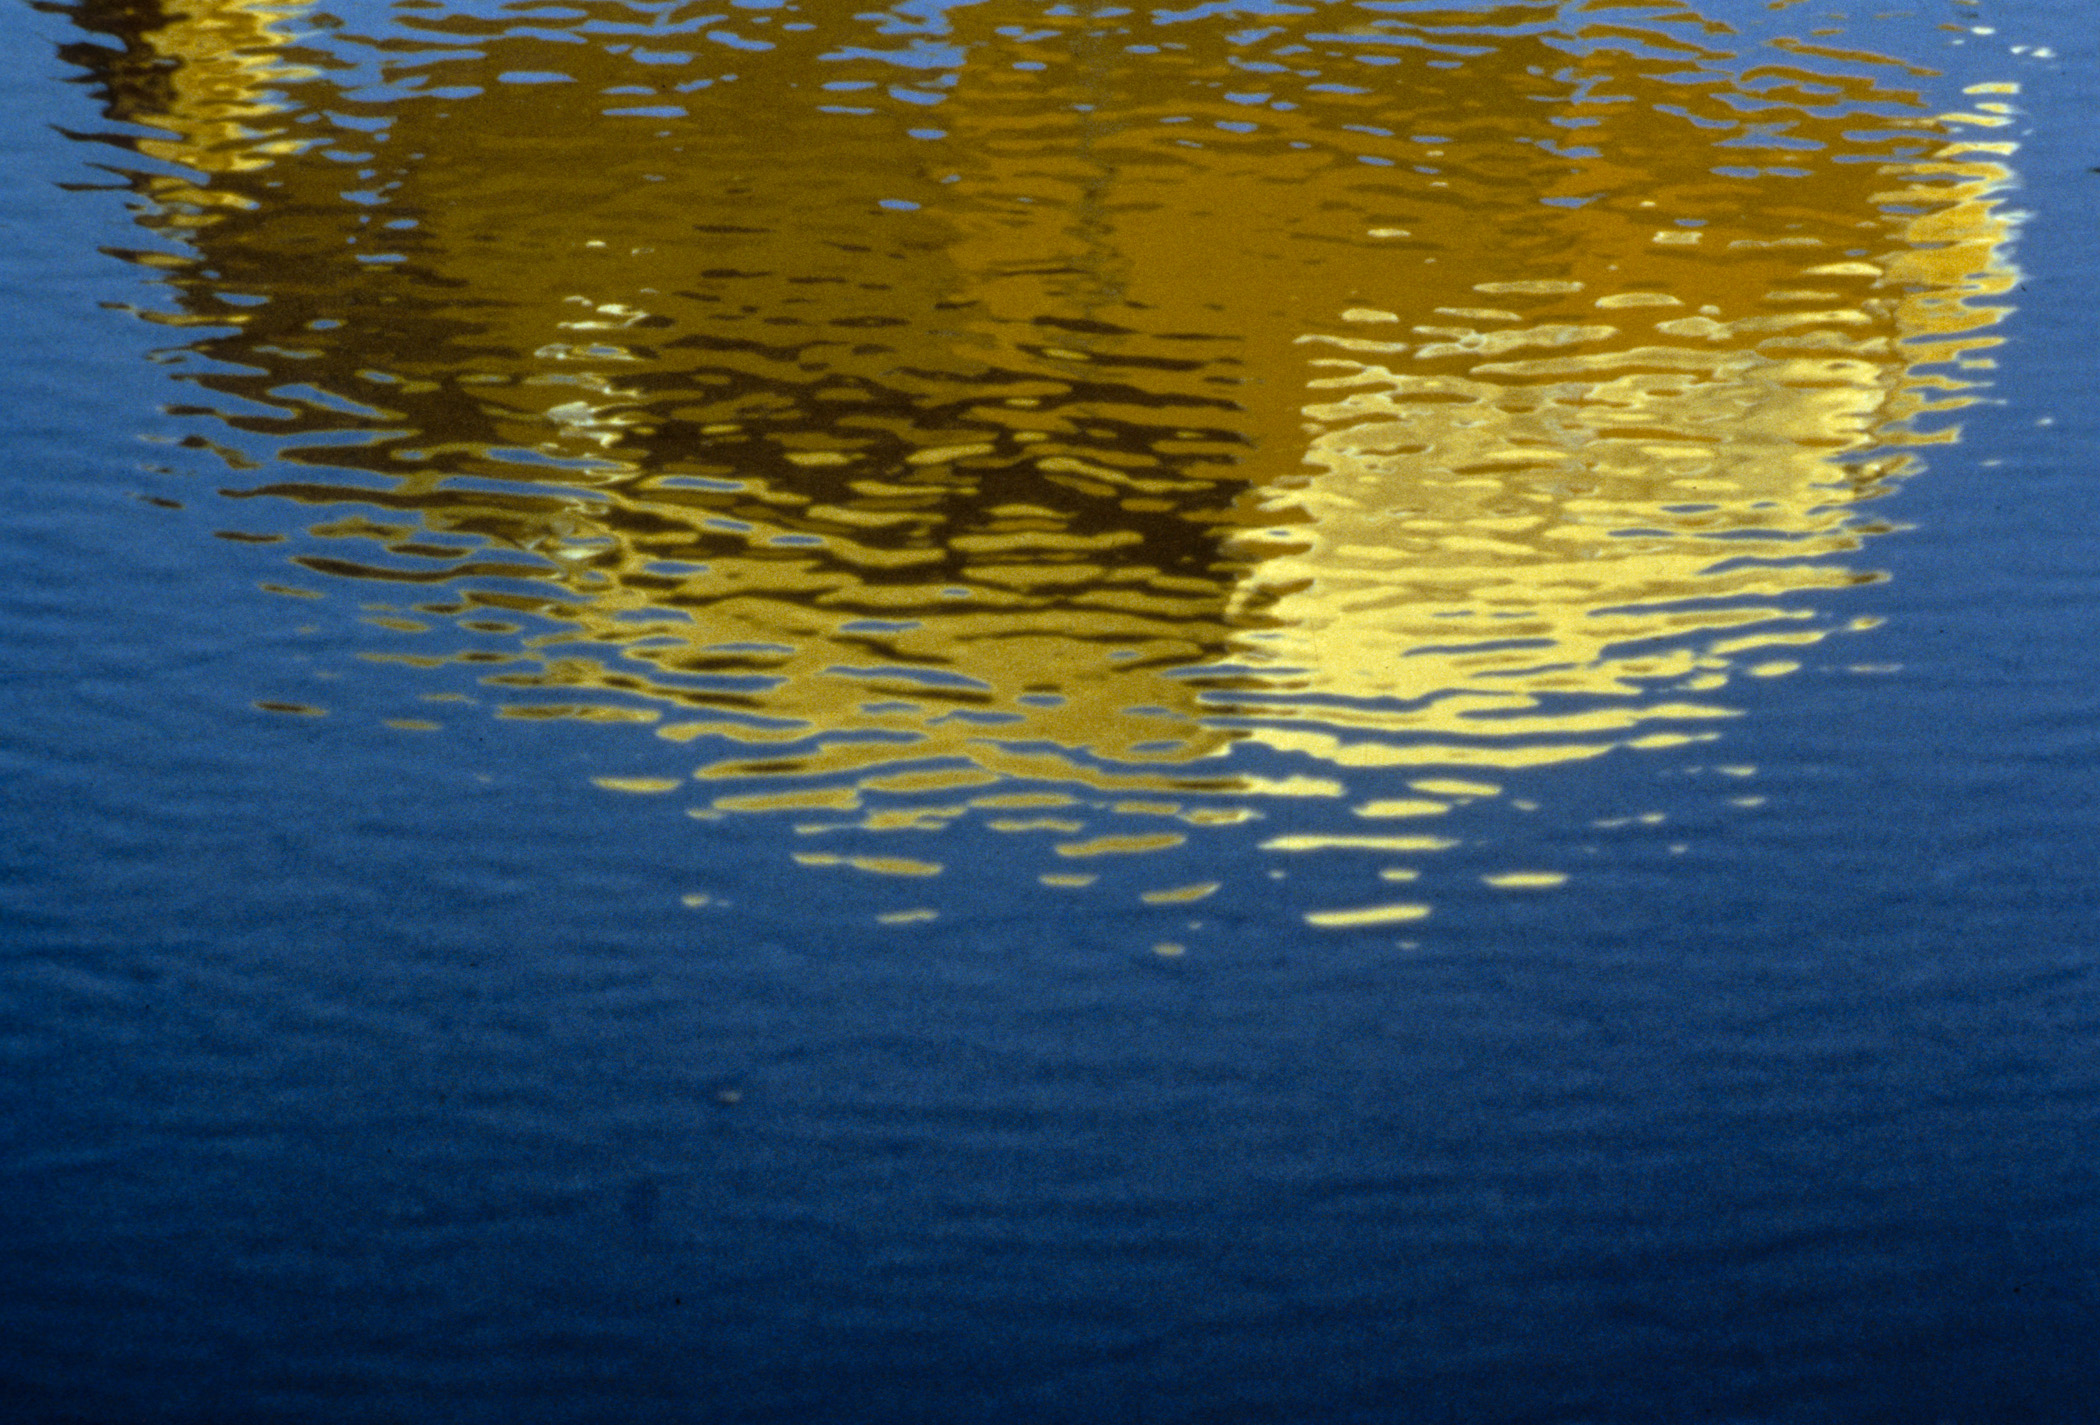 yellow and blue reflection - water - Impressionism - Miksang - copyright - John McQuade